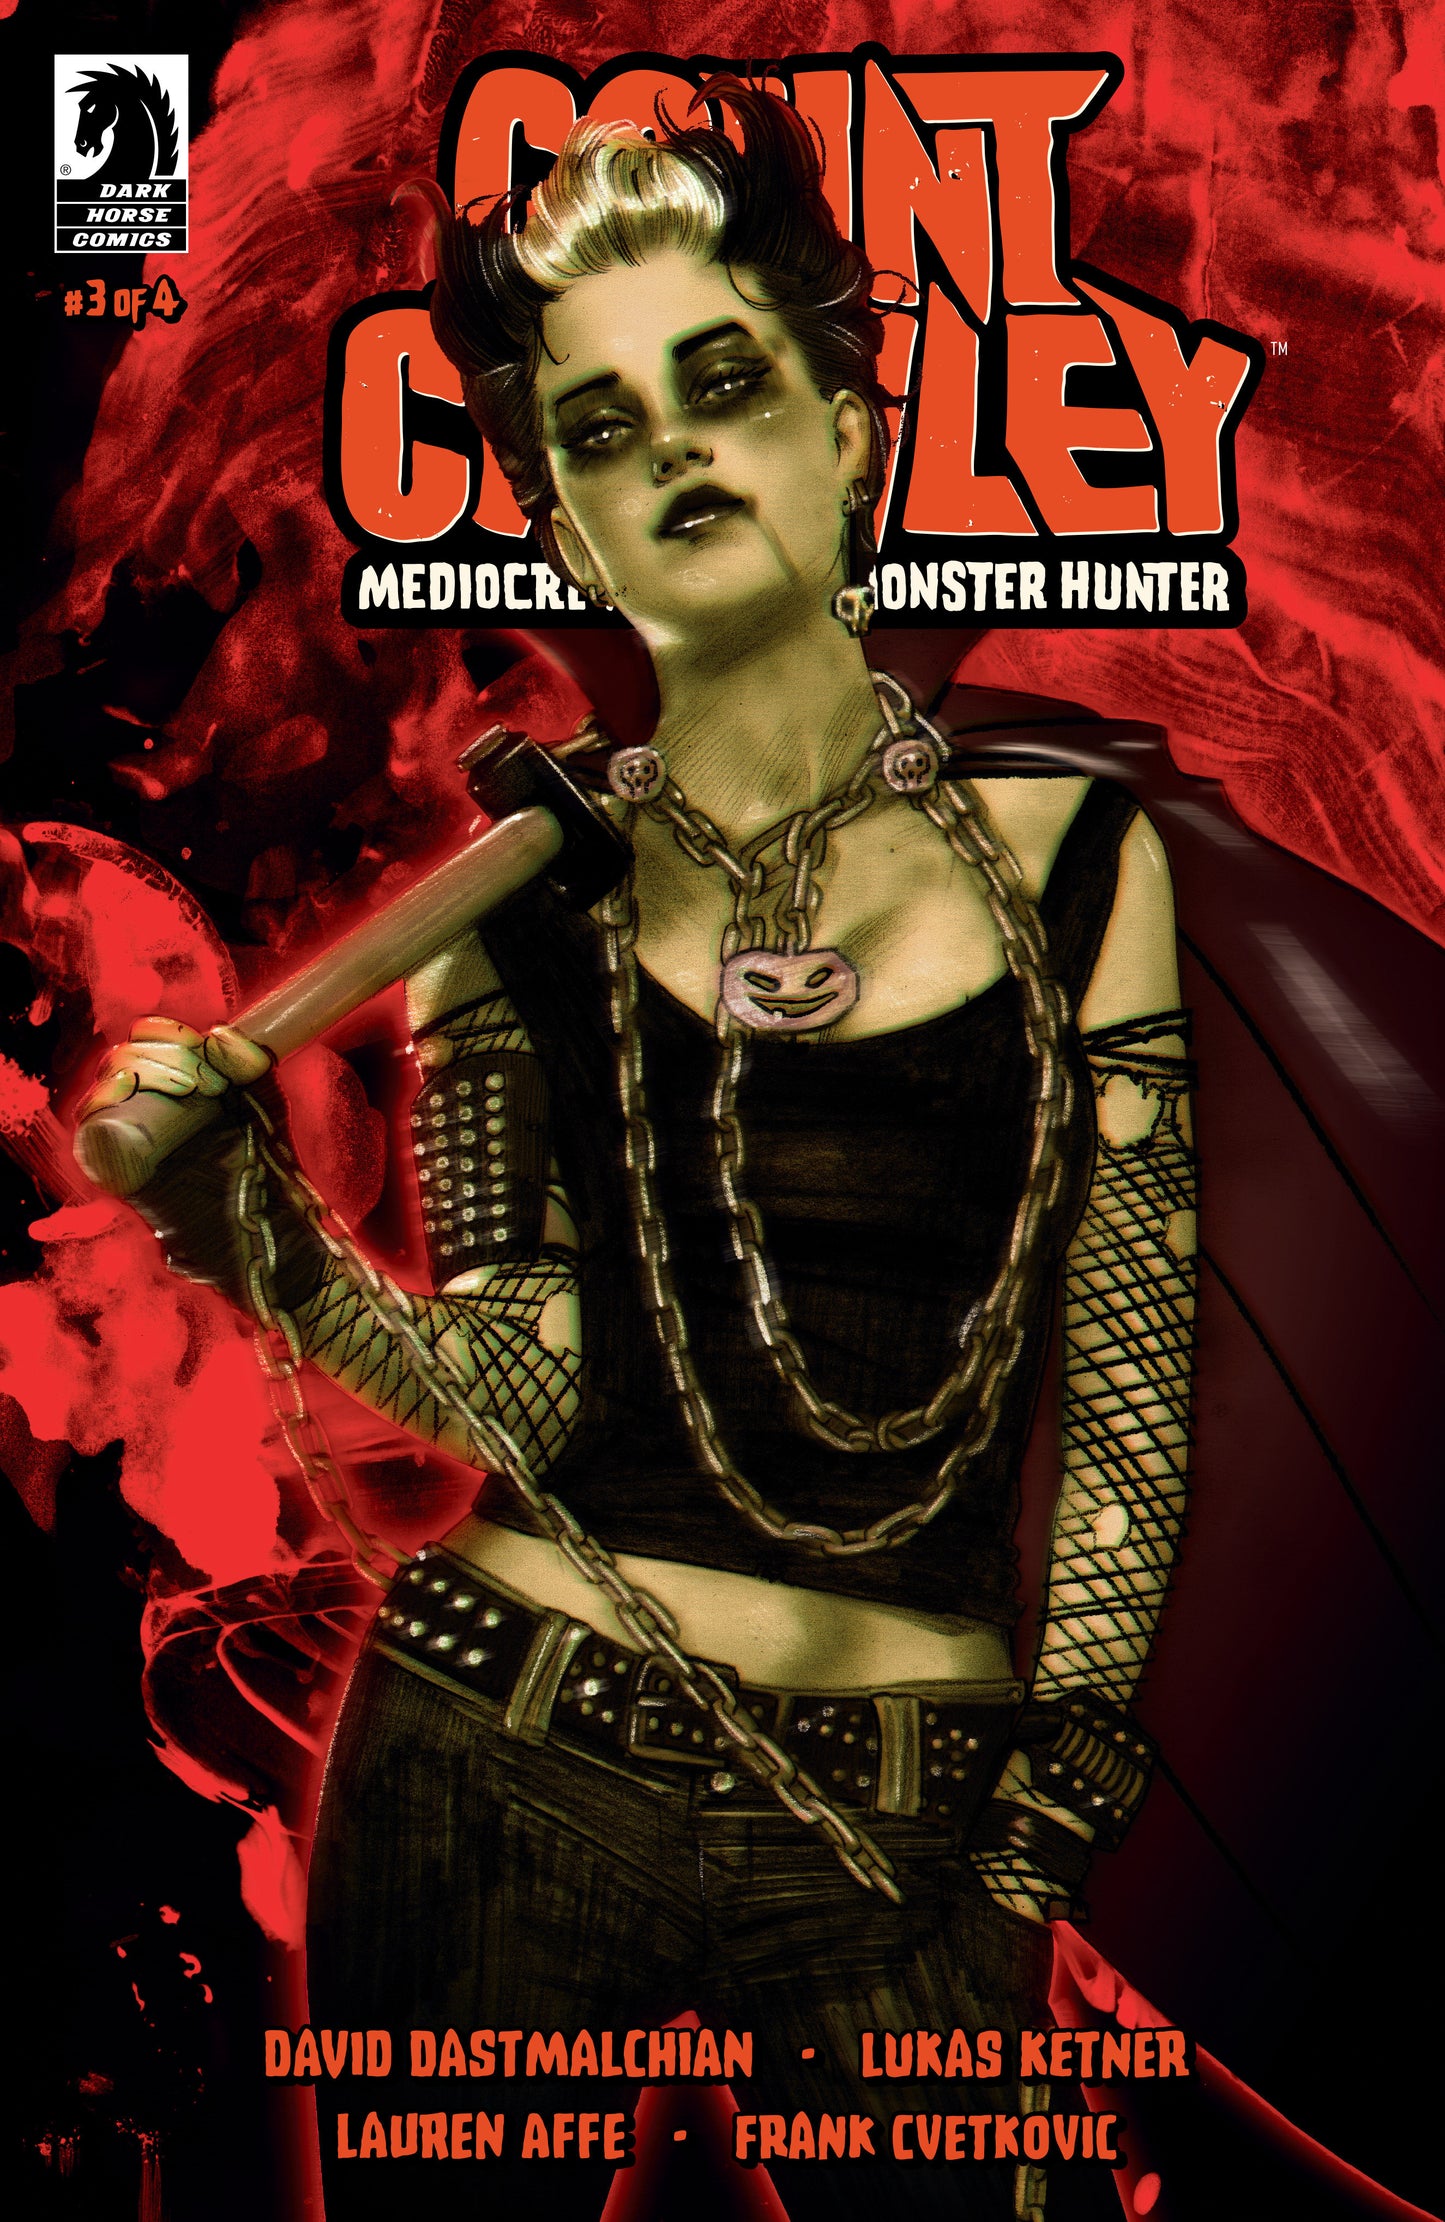 Count Crowley: Mediocre Midnight Monster Hunter #3 (CVR B) (Tula Lotay) - Release Date:  3/13/24